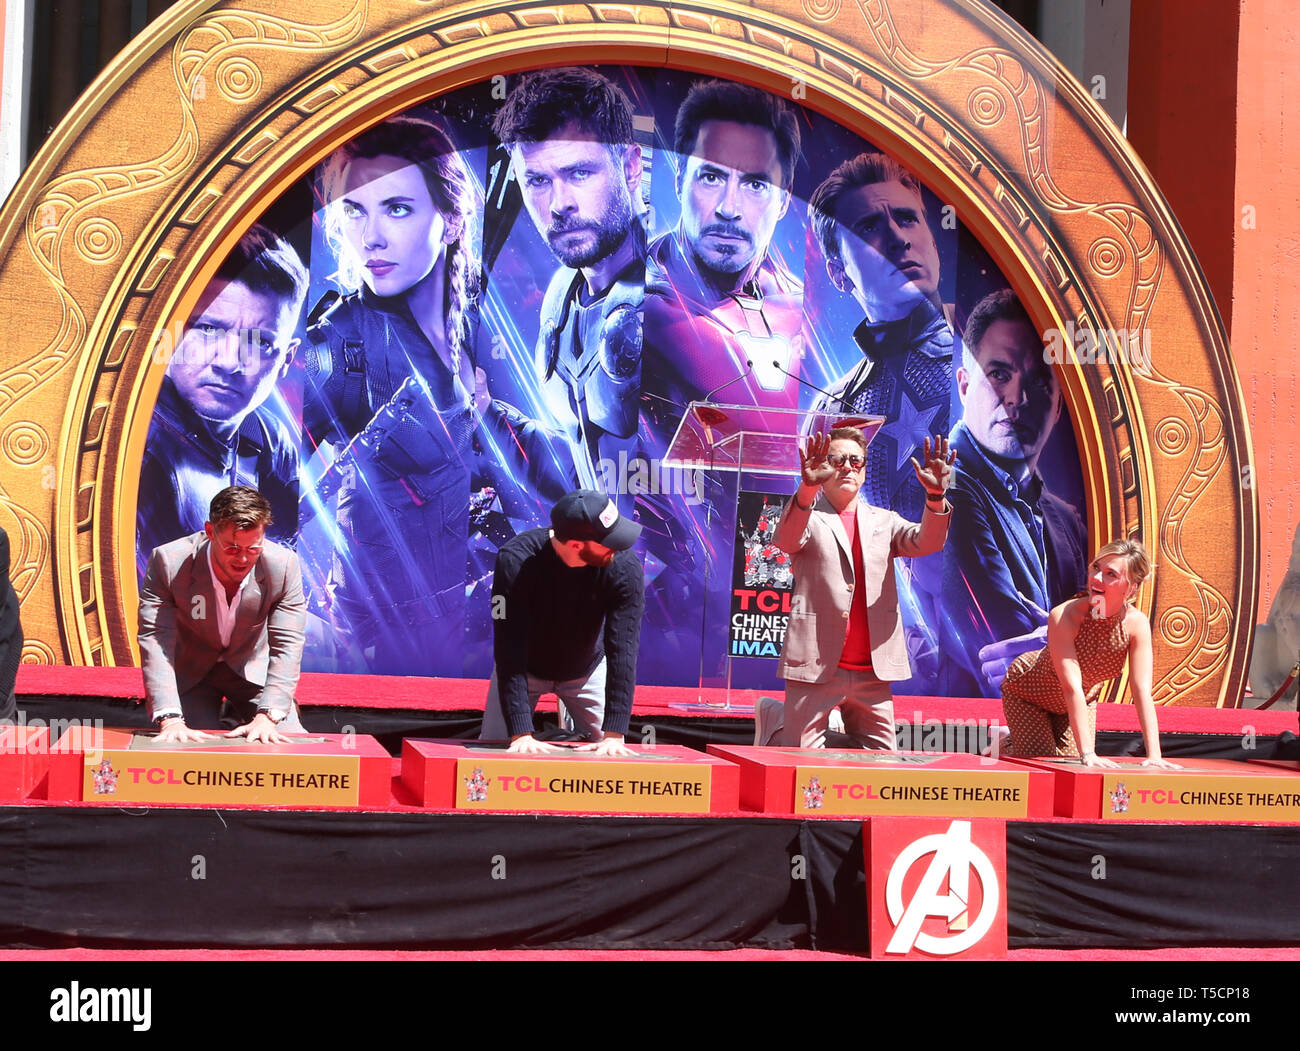 Hollywood, Ca. 23rd Apr, 2019. Chris Hemsworth. Chris Evans, Robert Downey Jr. and Scarlett Johansson at the Marvel StudiosÕ Avengers: Endgame Cast Handprint Ceremony at the TCL Chinese Theatre IMAX in Hollywood, California on April 23, 2019. Credit: Faye Sadou/Media Punch/Alamy Live News Stock Photo